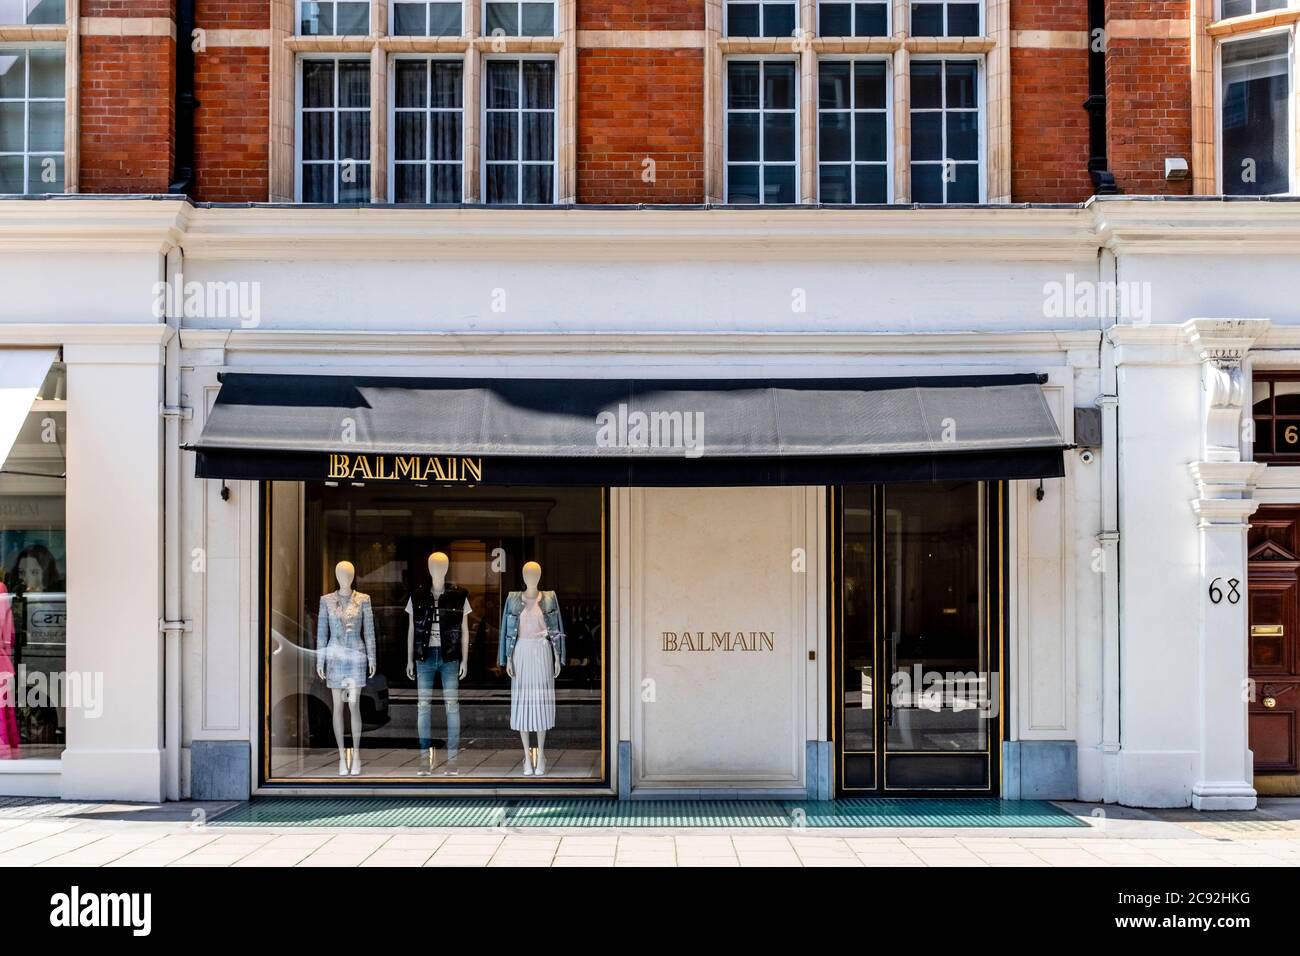 Balmain Luxury Clothing and Accessories Store, South Audley Street, London,  England Stock Photo - Alamy